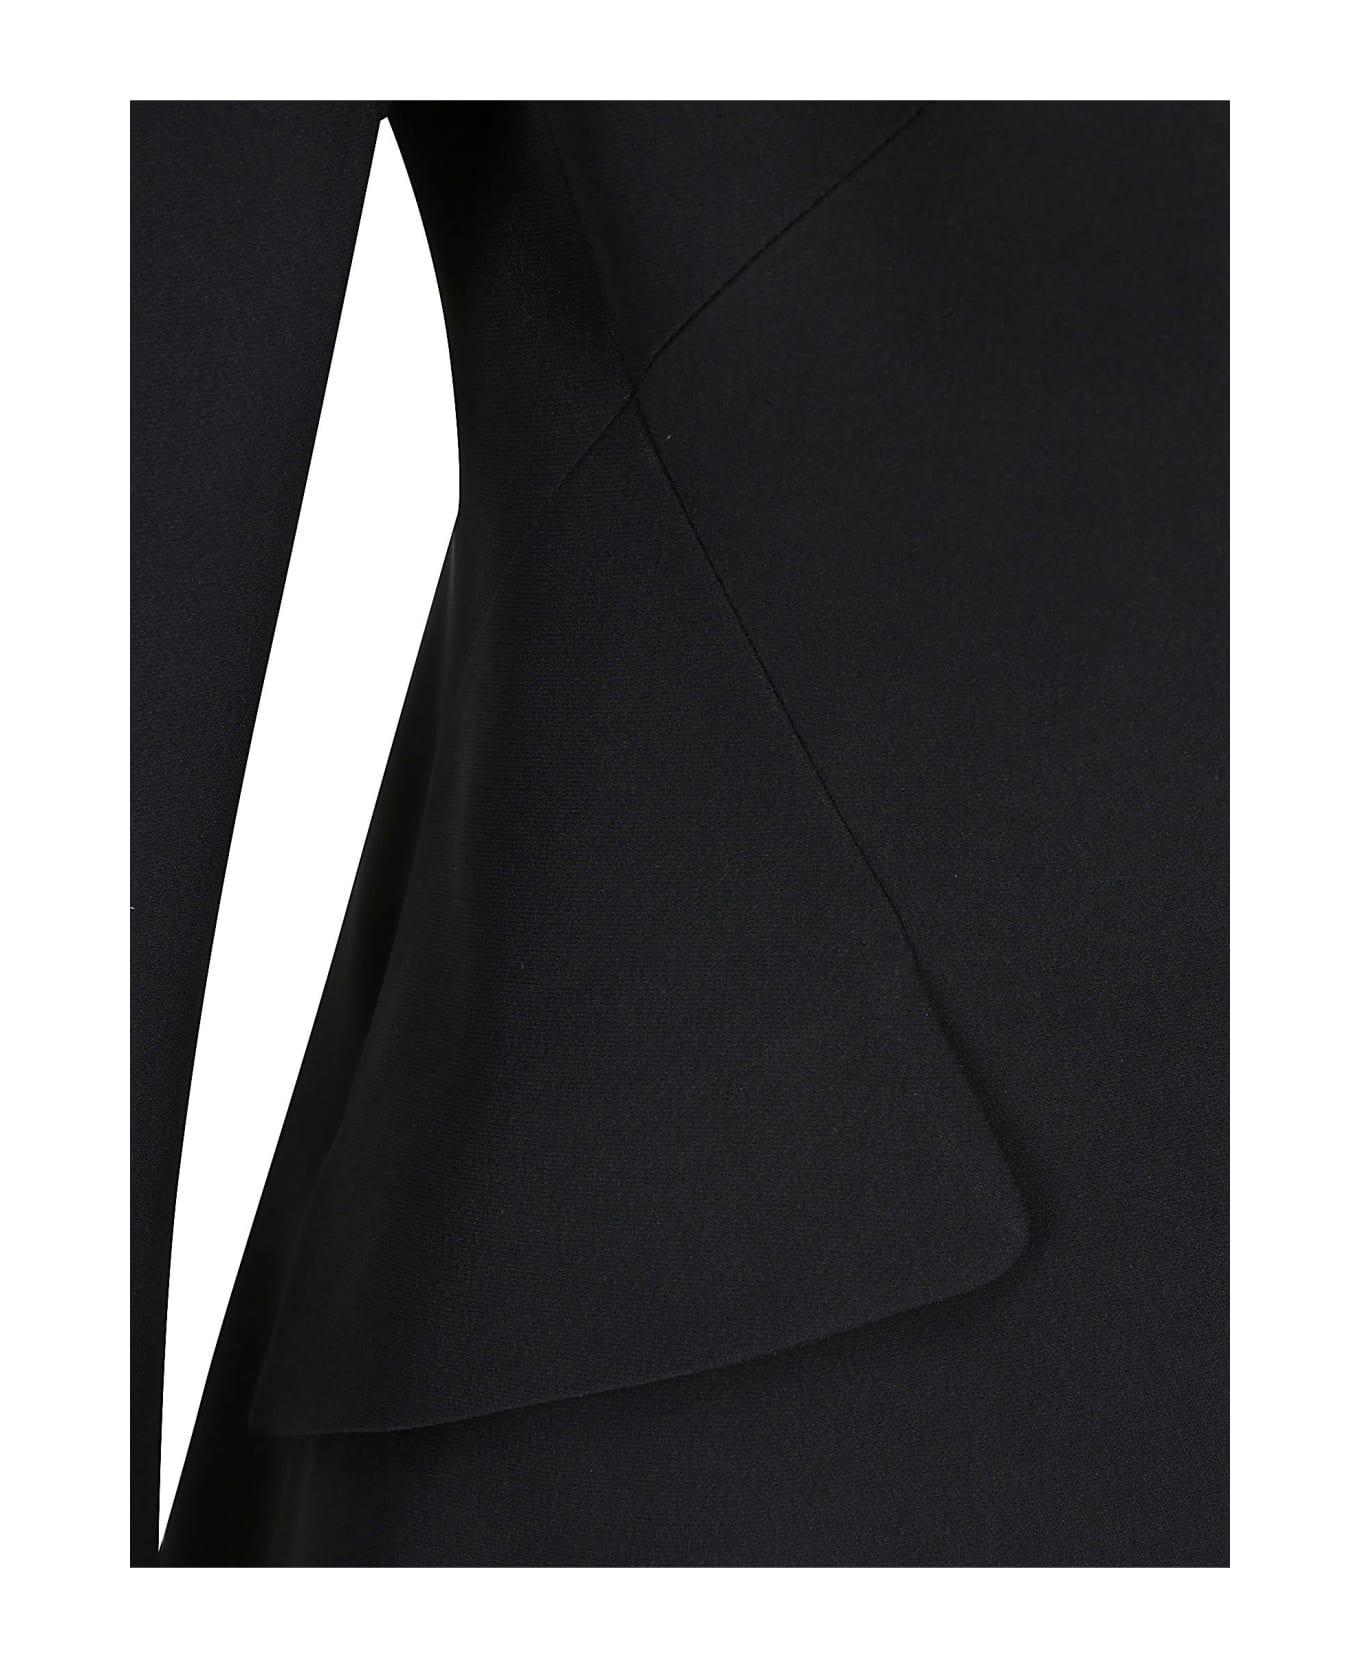 Alexander McQueen Black Jacket In Thin Crepe With Pointed Shoulders - Nero ブレザー